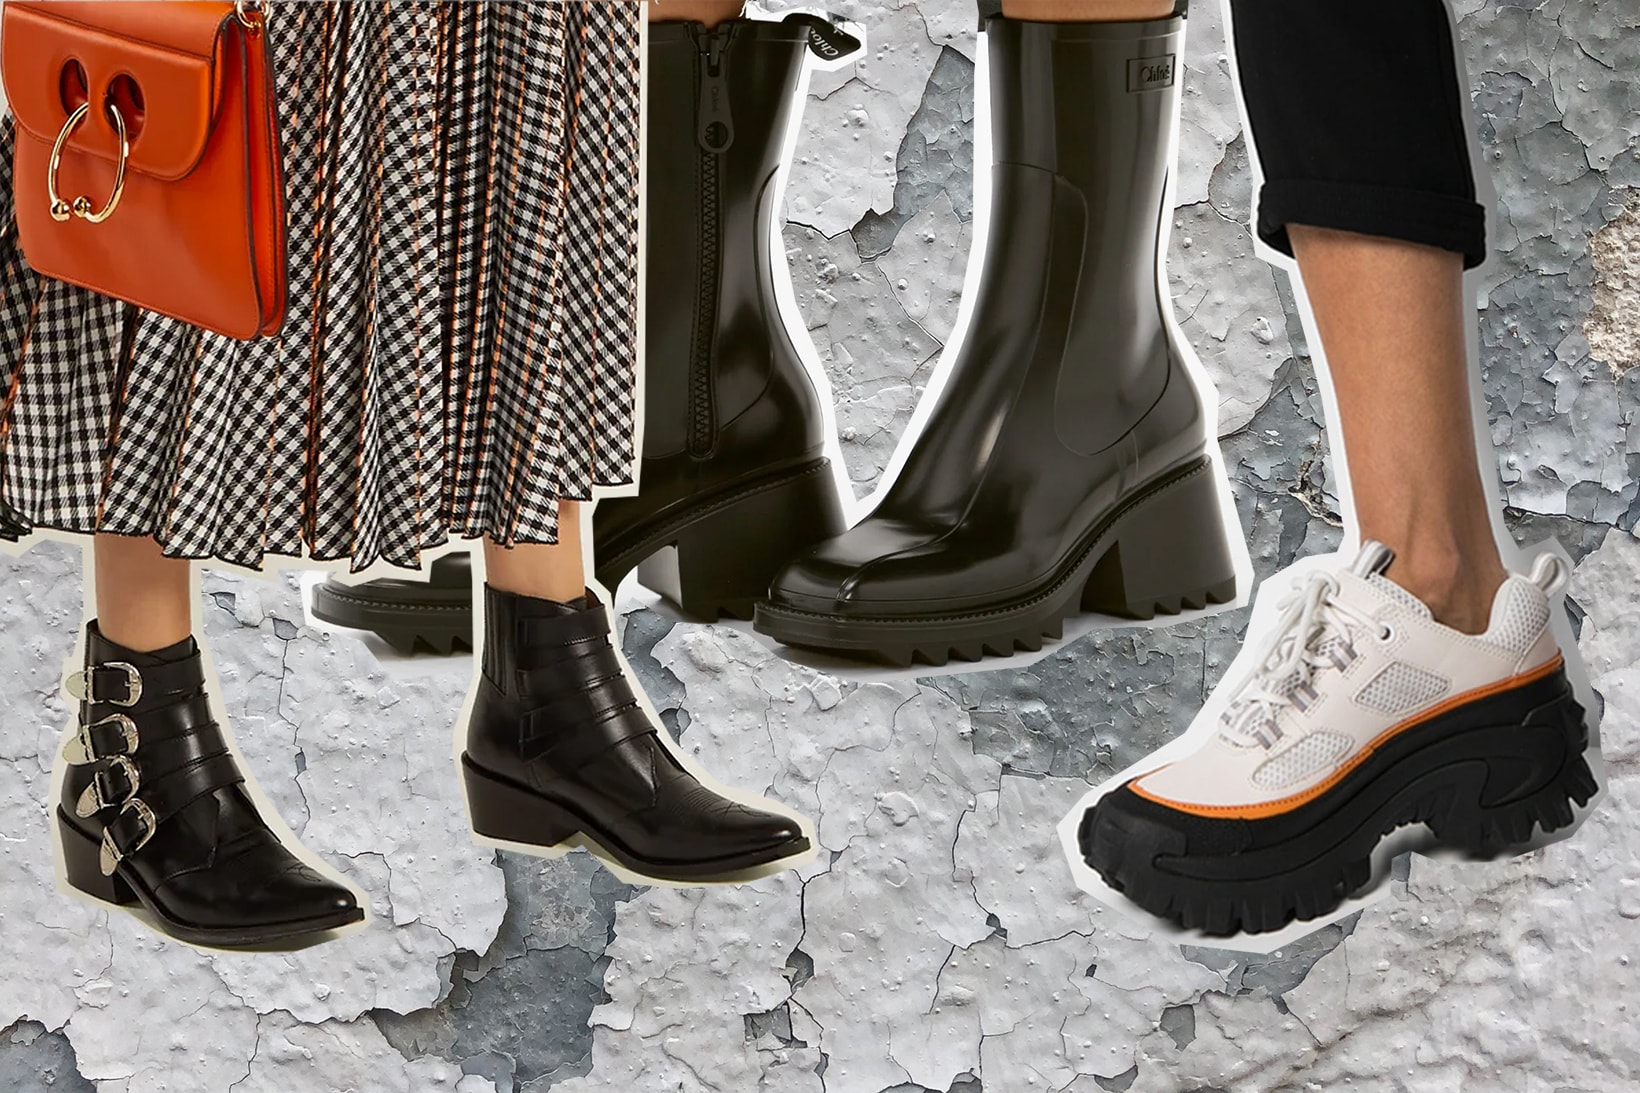 Essential Shoes for Fall & Winter: Boots & More